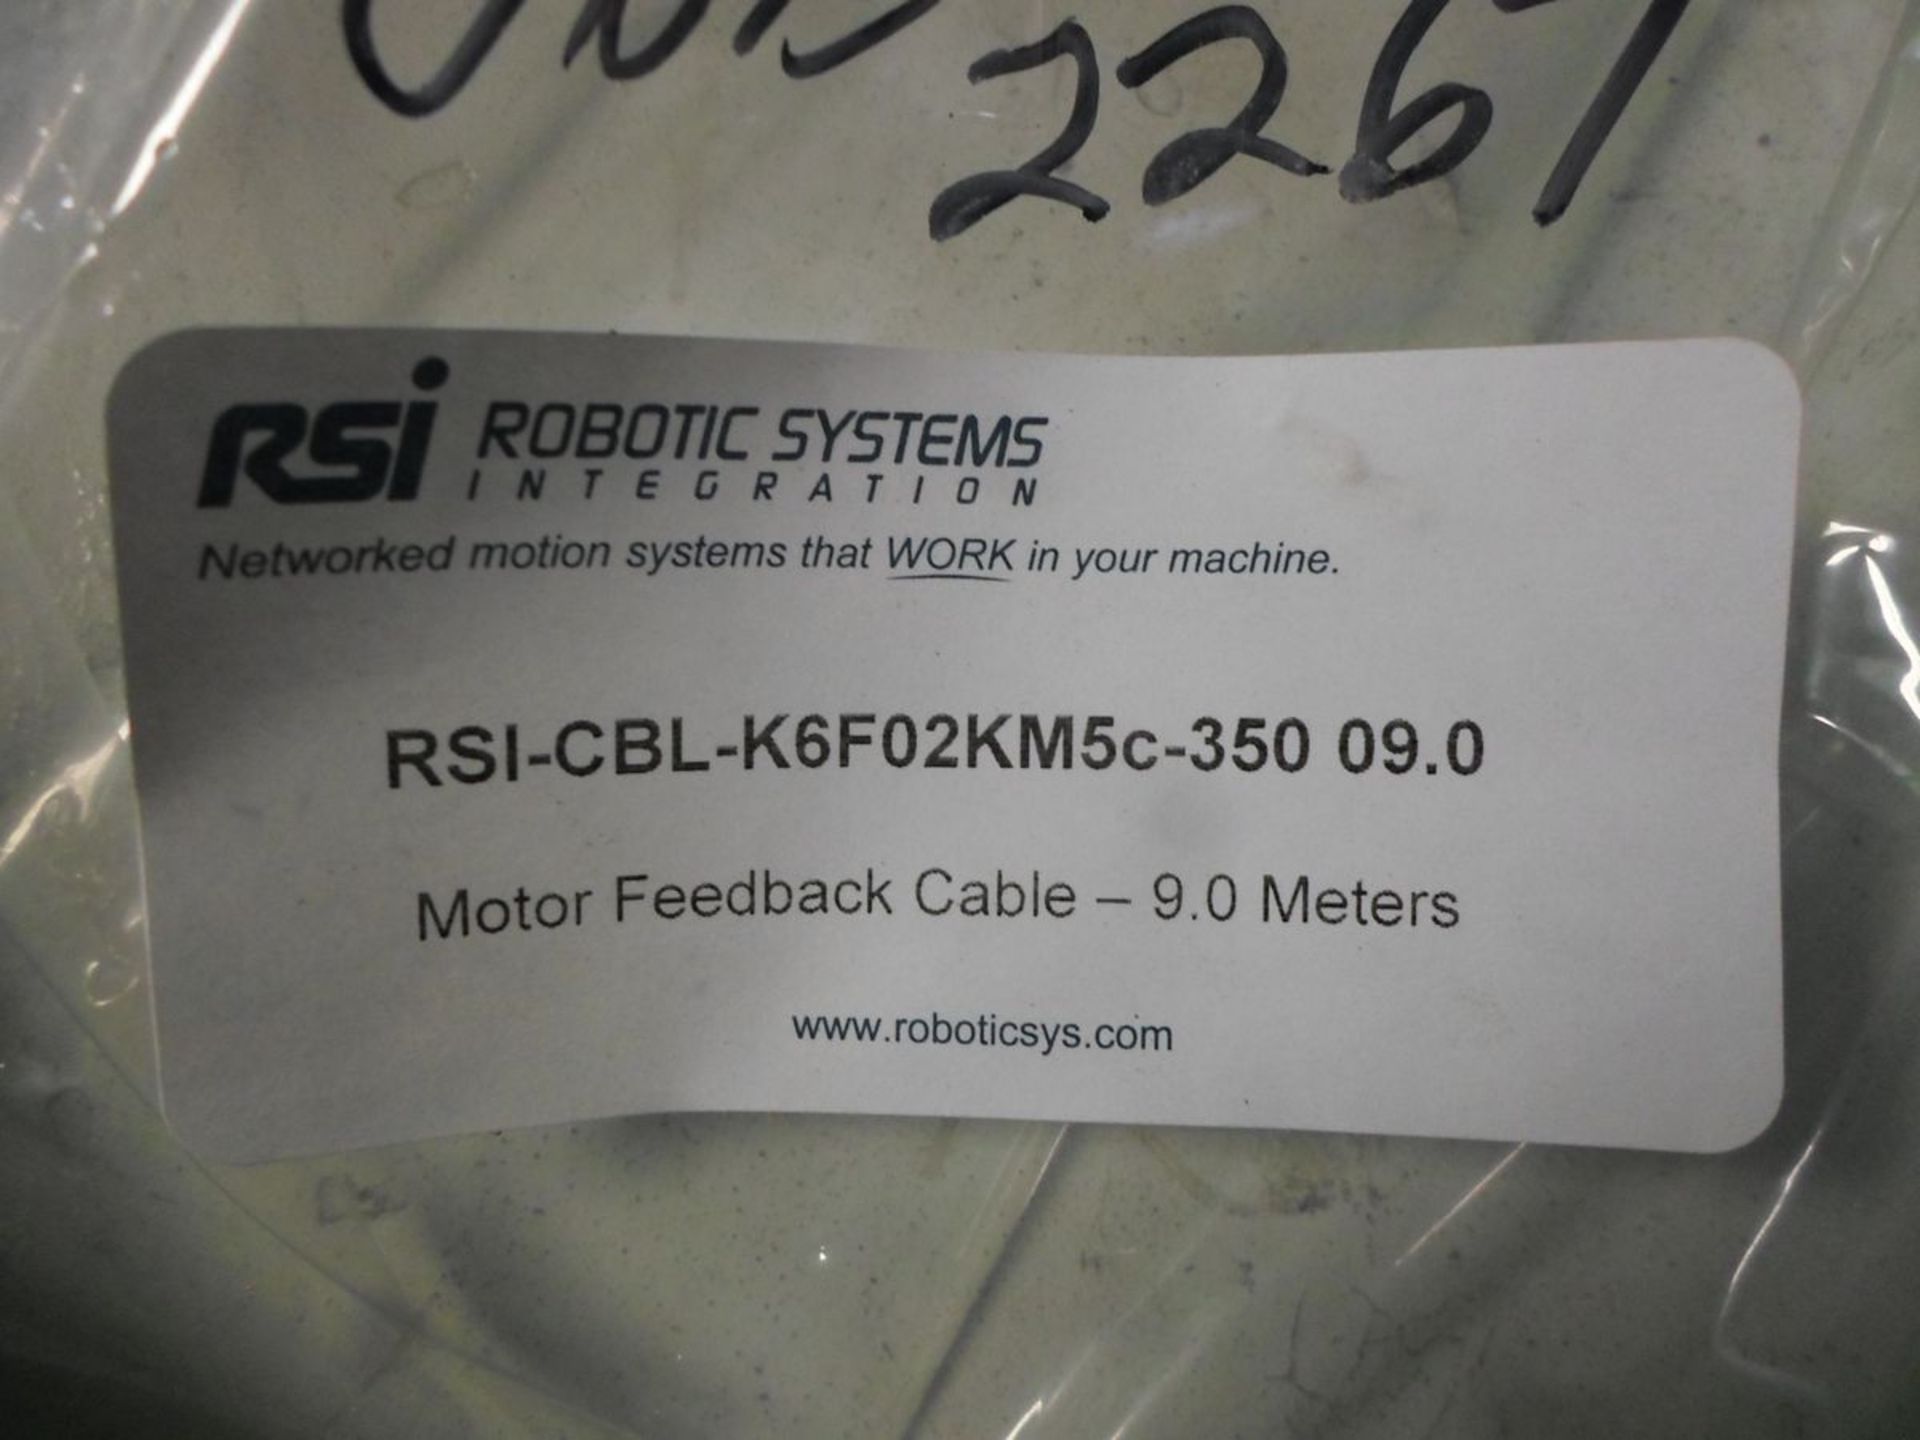 LOT OF THREE Motor Interface Cable w/ A-B 2090-K6CK Connectors RSI CBL K6F02KM5c-350 09.0 - Image 2 of 2